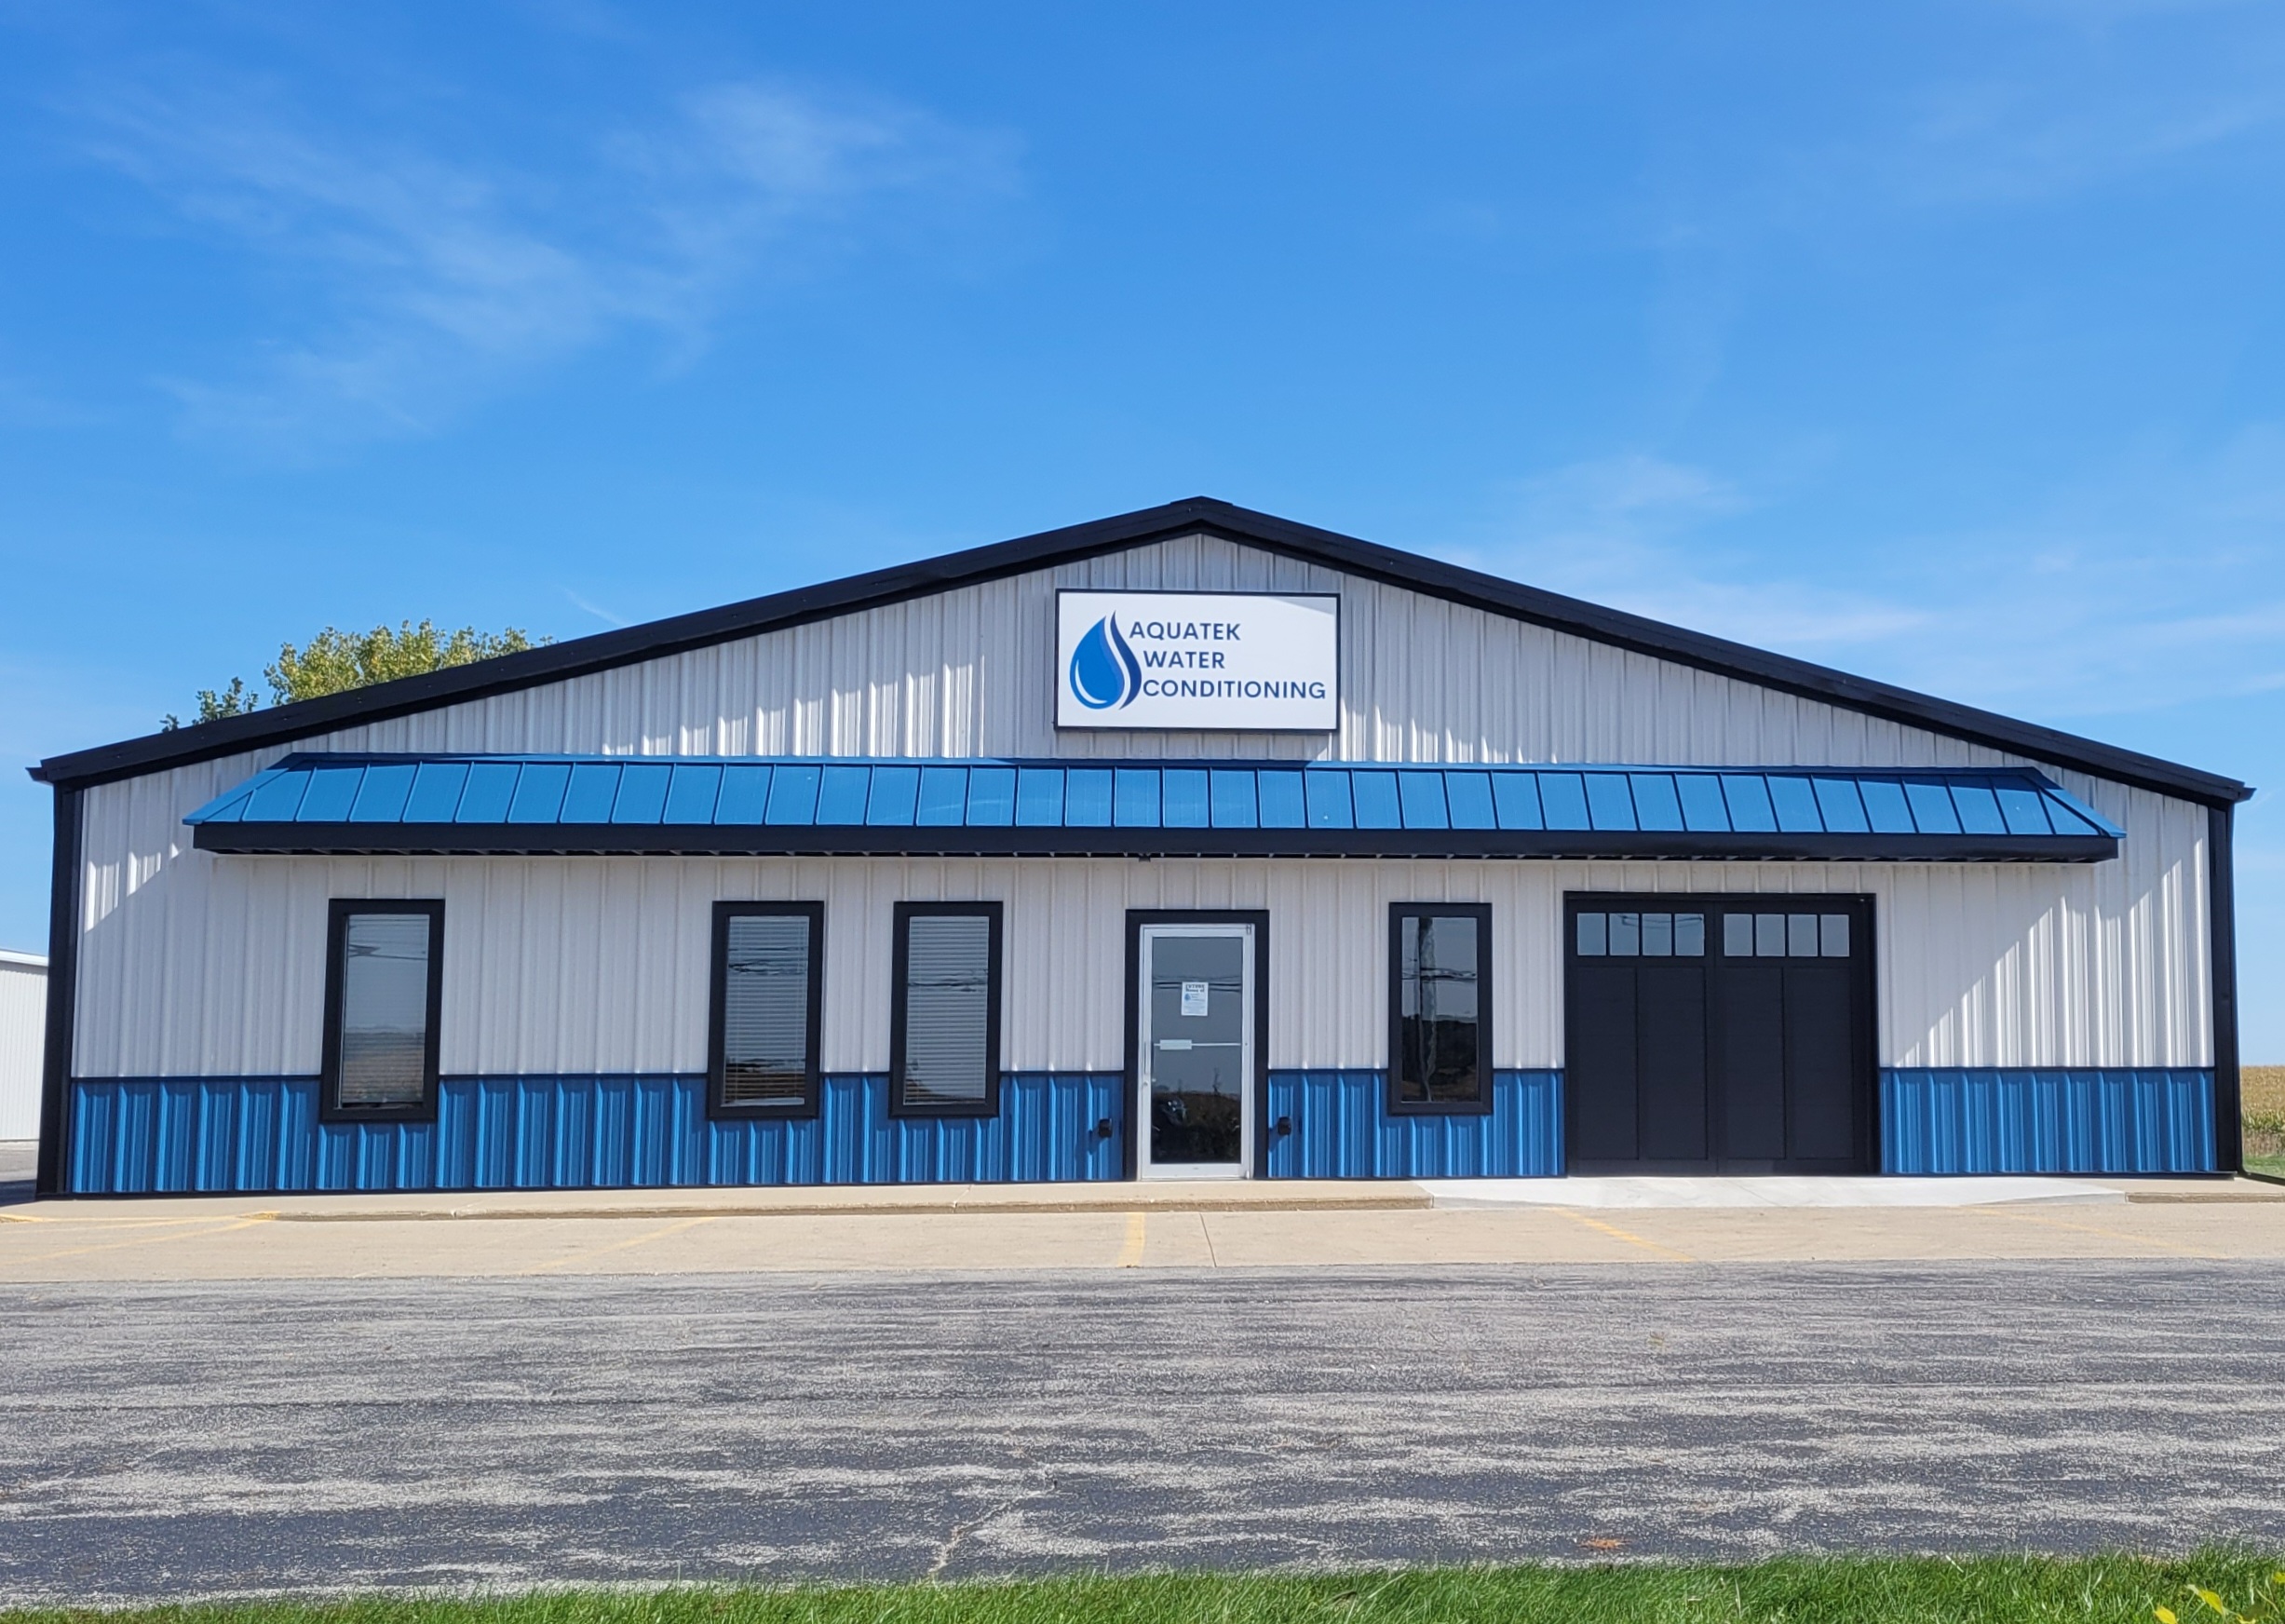 New Aquatek Water Conditioning Building located at 7300 State Route 108, Wauseon, OH 43567